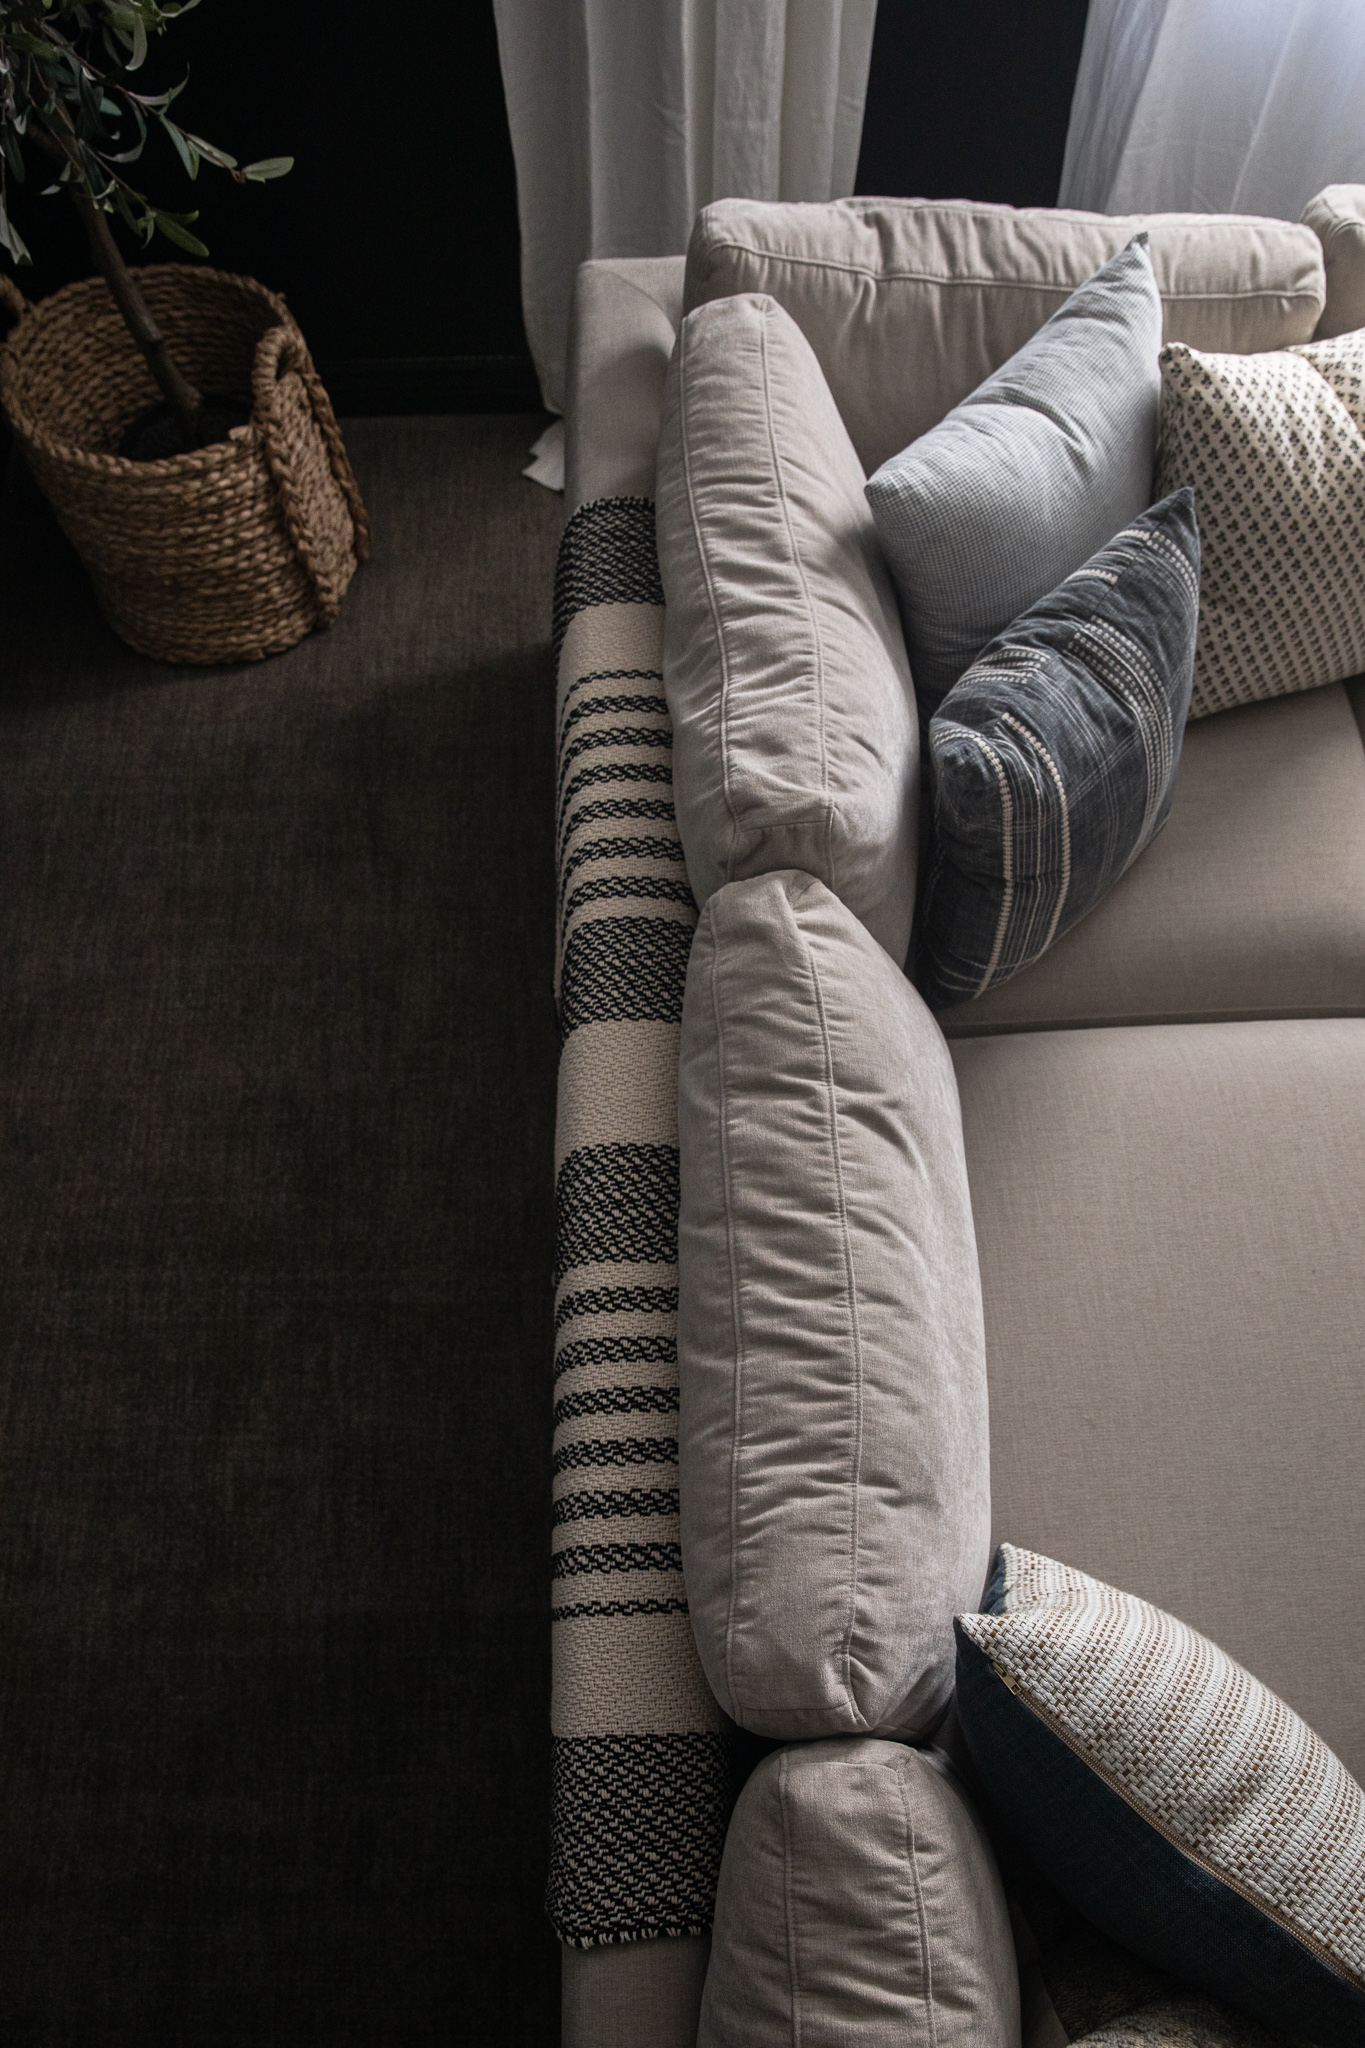 Try This: A Blanket over the Back of your Sofa as a Design Element